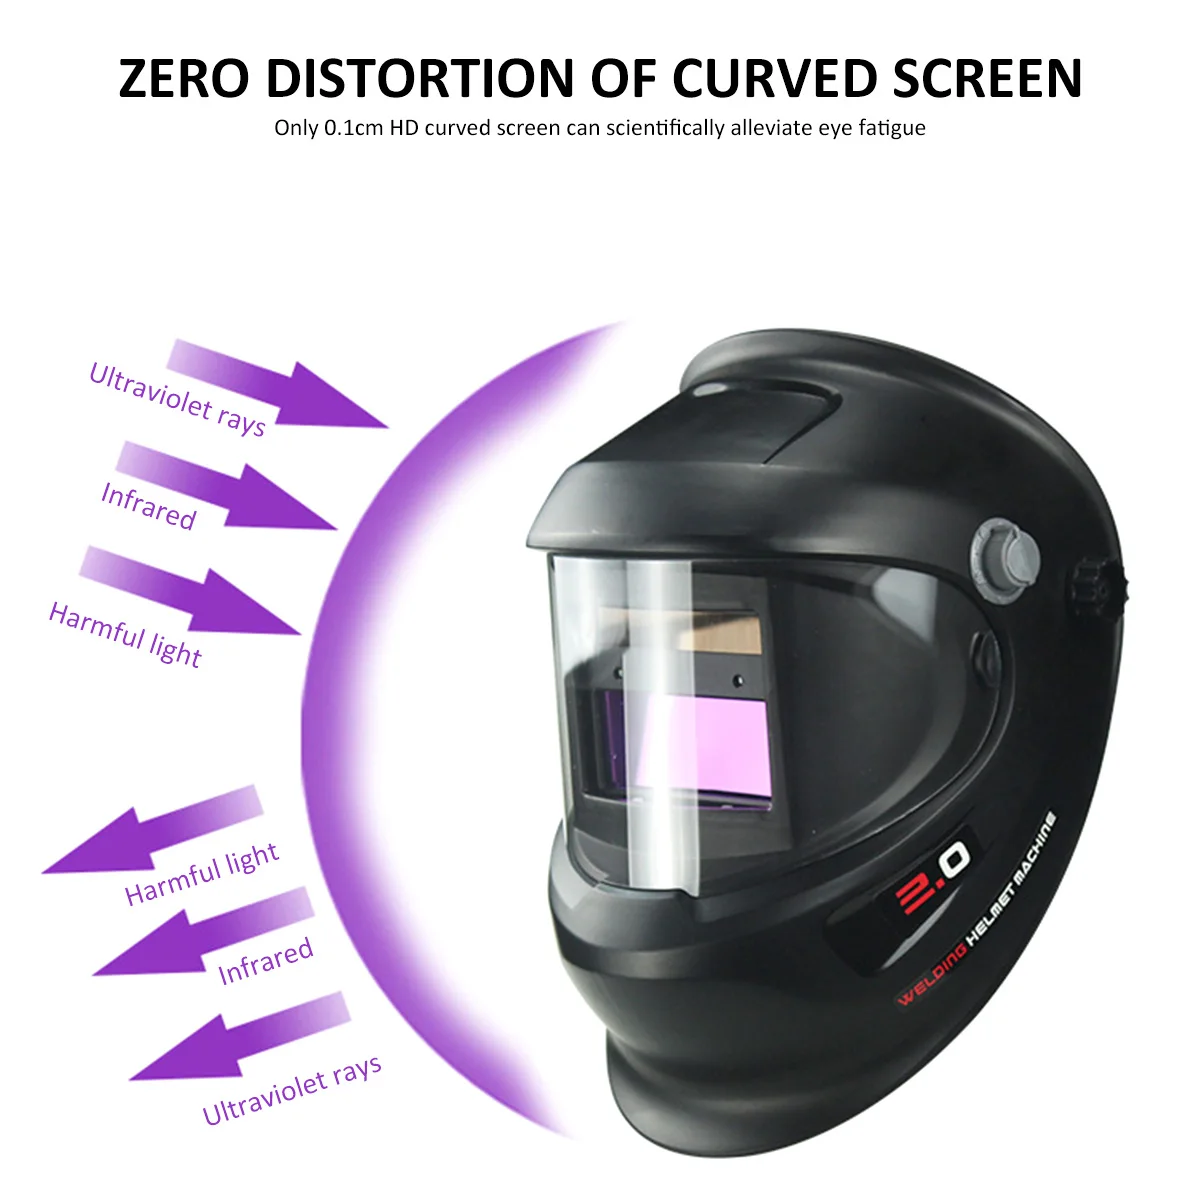 

Welding Helmet True Color Auto Darkening Welding Face Cover Solar Powered Large Viewing Screen Weld Hood for Grinding Cutting